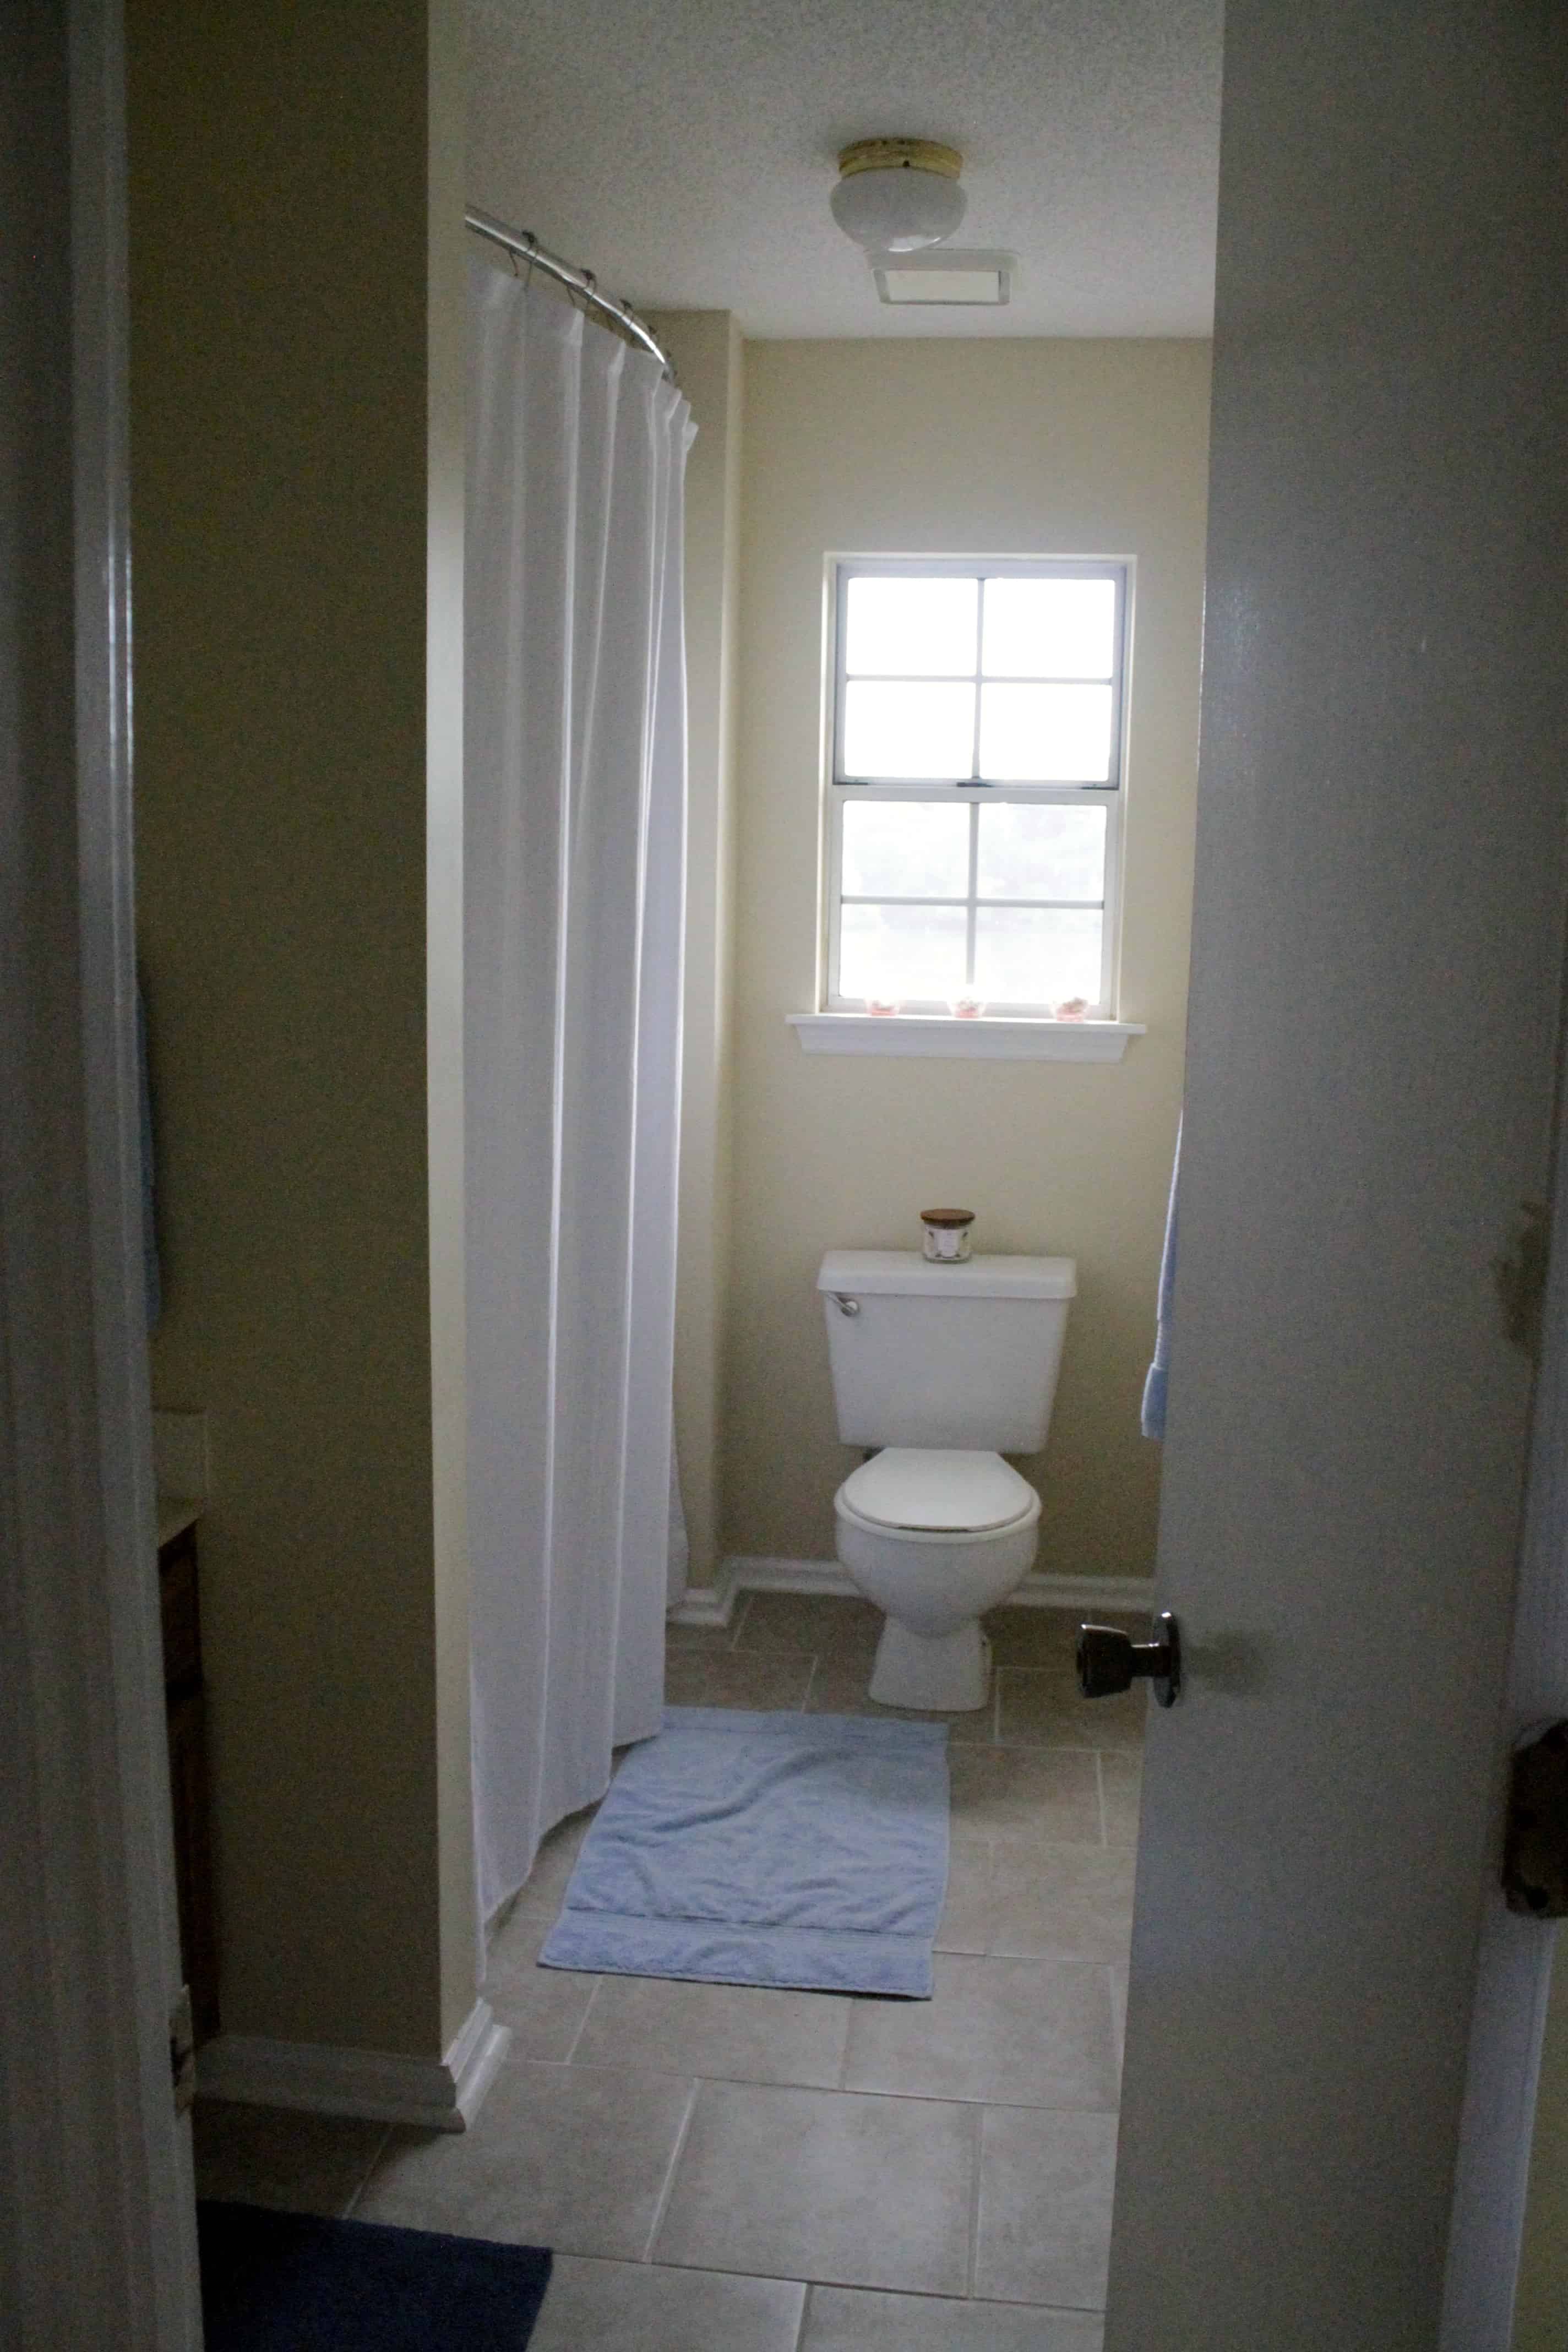 Getting the Guest Bathroom Ready for Guests - Charleston Crafted